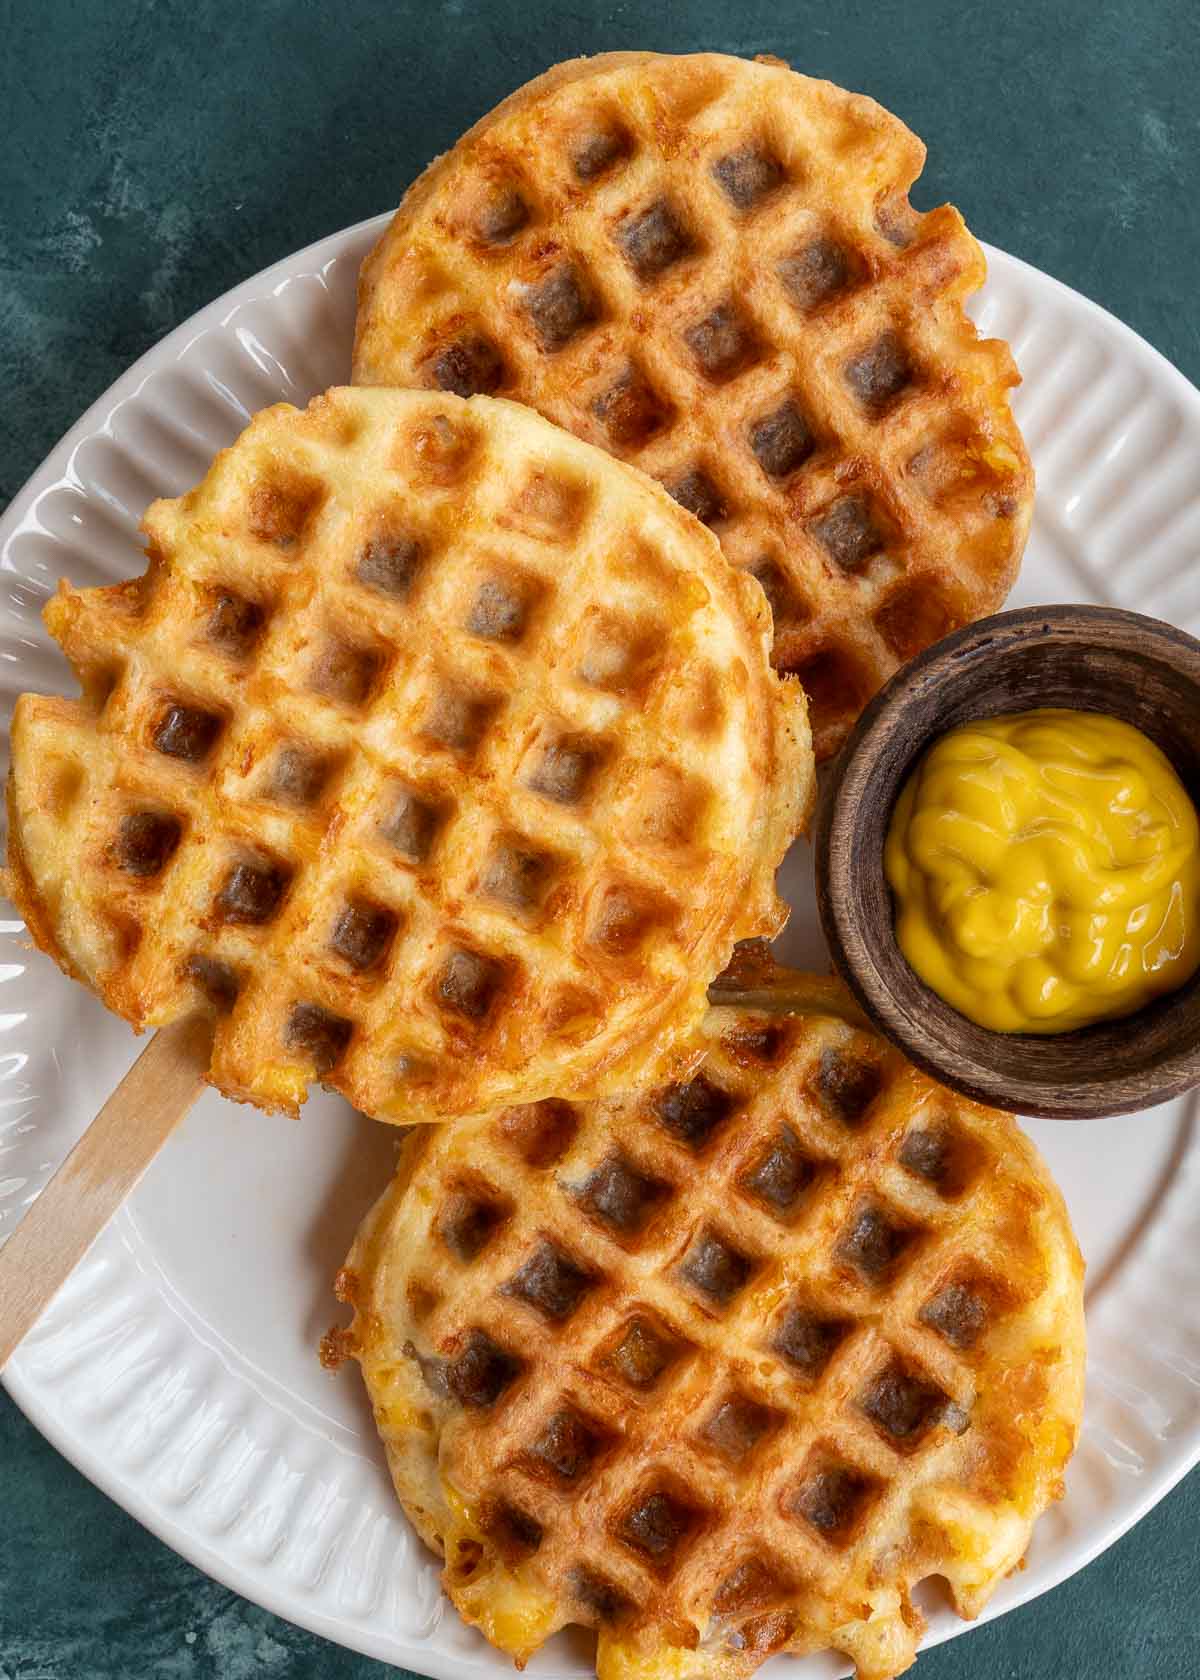 chaffles stuffed with sausage on a plate with mustard